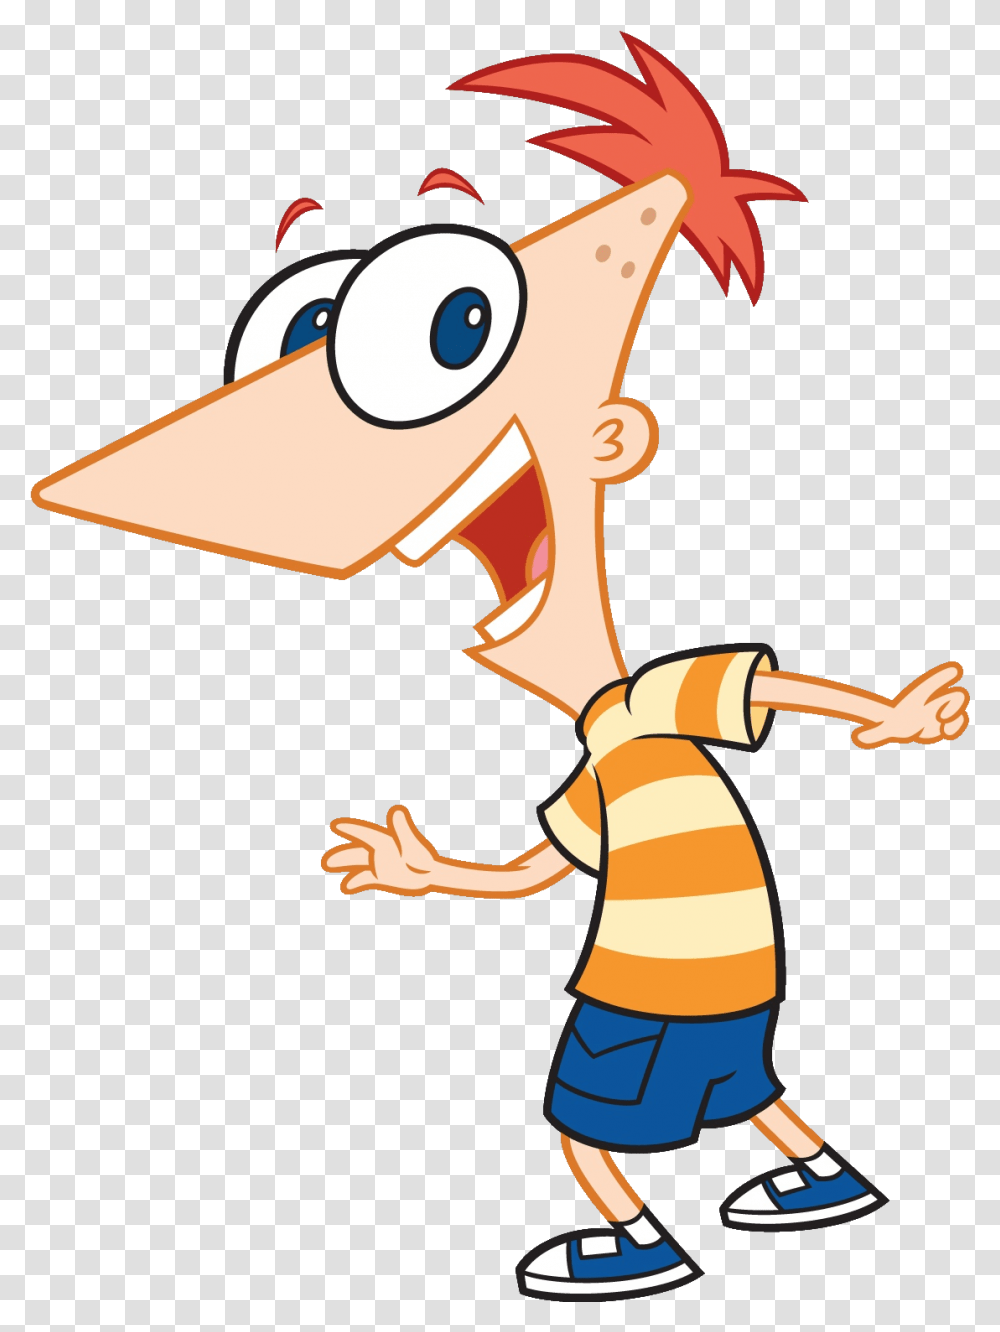 Cartoon Asteroid Phineas And Ferb Phineas, Animal, Apparel Transparent Png